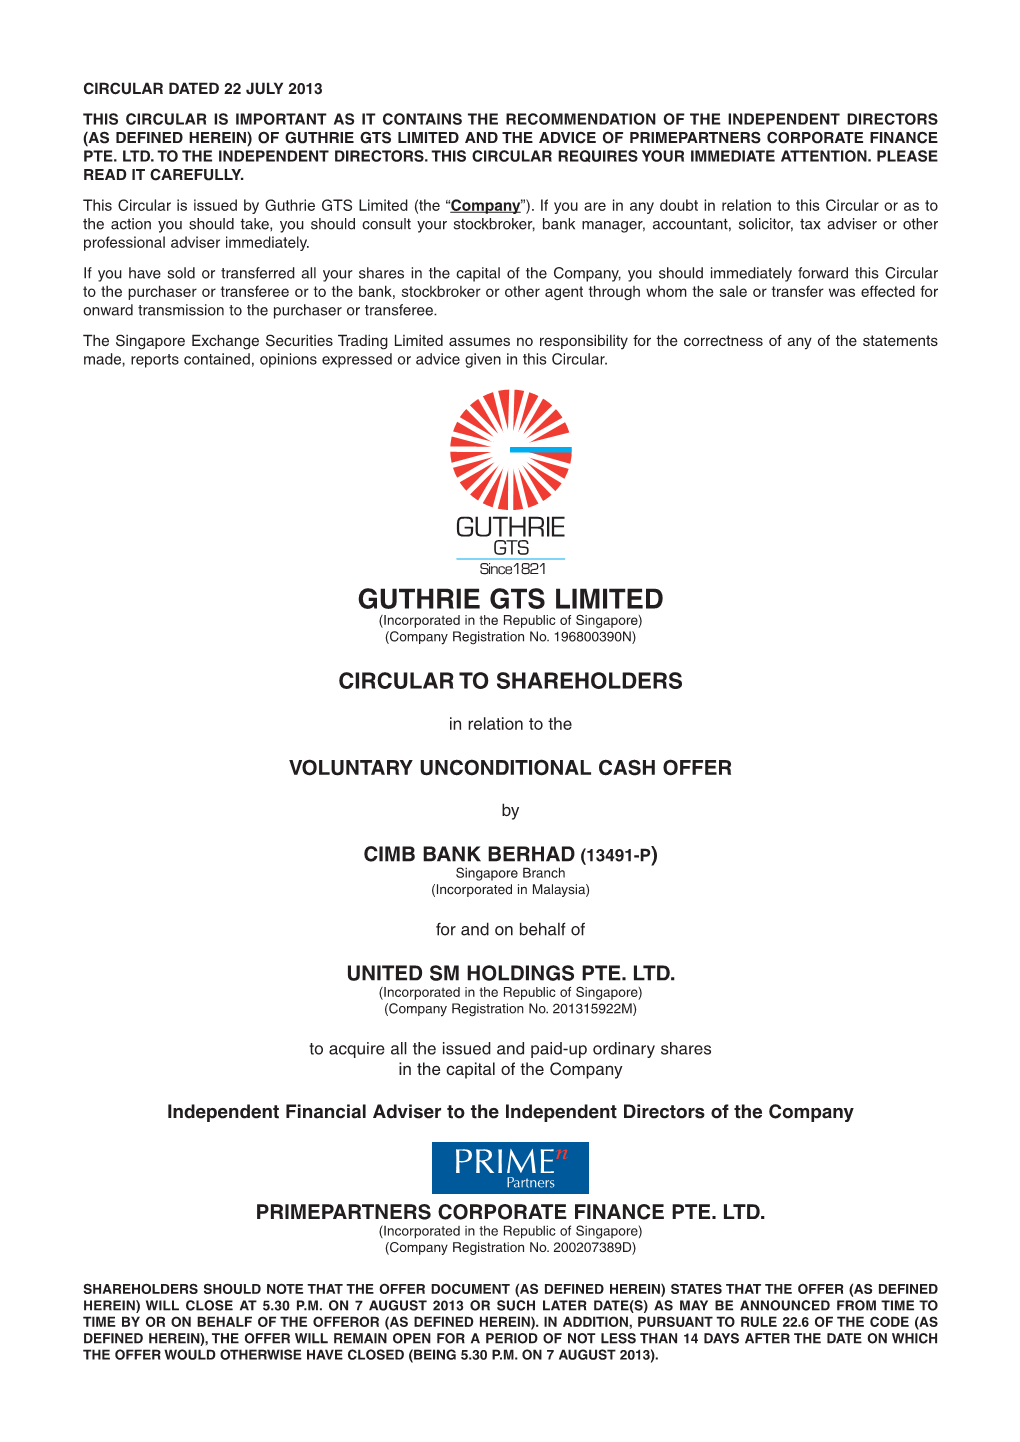 Guthrie Gts Limited and the Advice of Primepartners Corporate Finance Pte